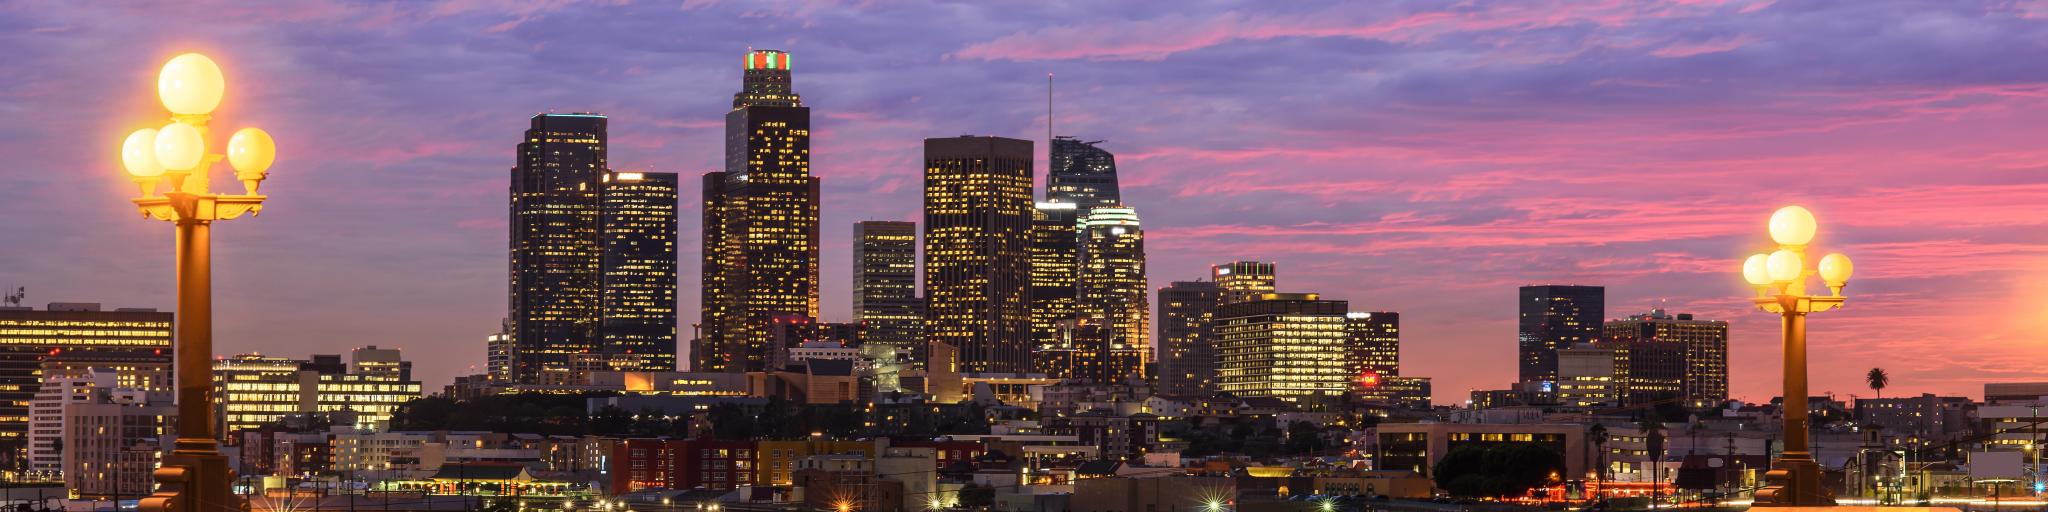 Evening shot of Downtown Los Angeles, California